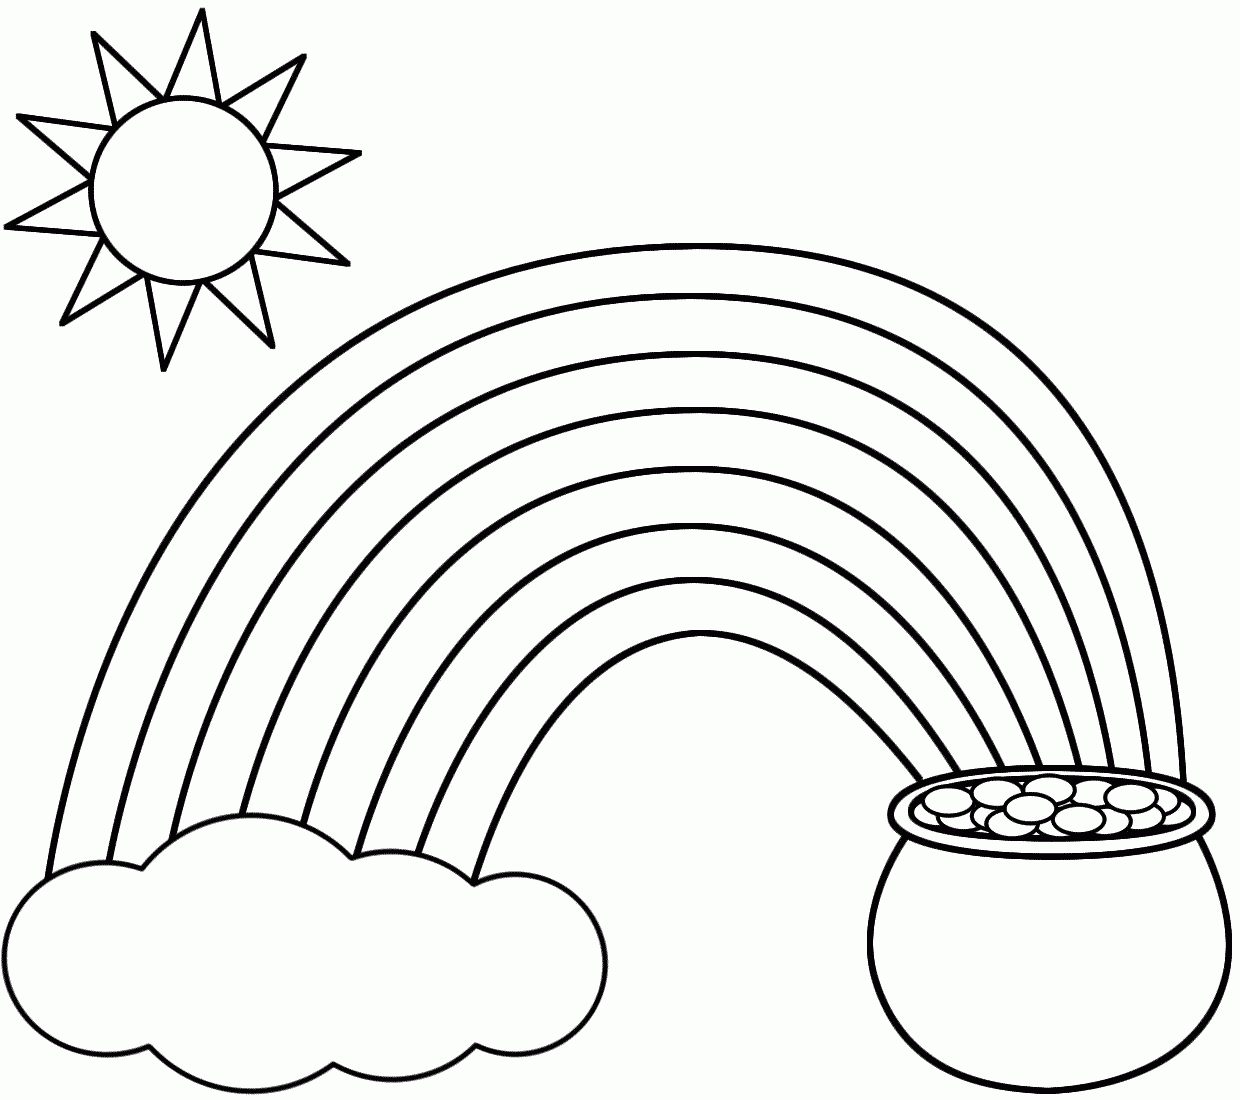 Rainbow, Pot Of Gold, Sun, And Cloud - Coloring Pages | School - Free Printable Pot Of Gold Coloring Pages